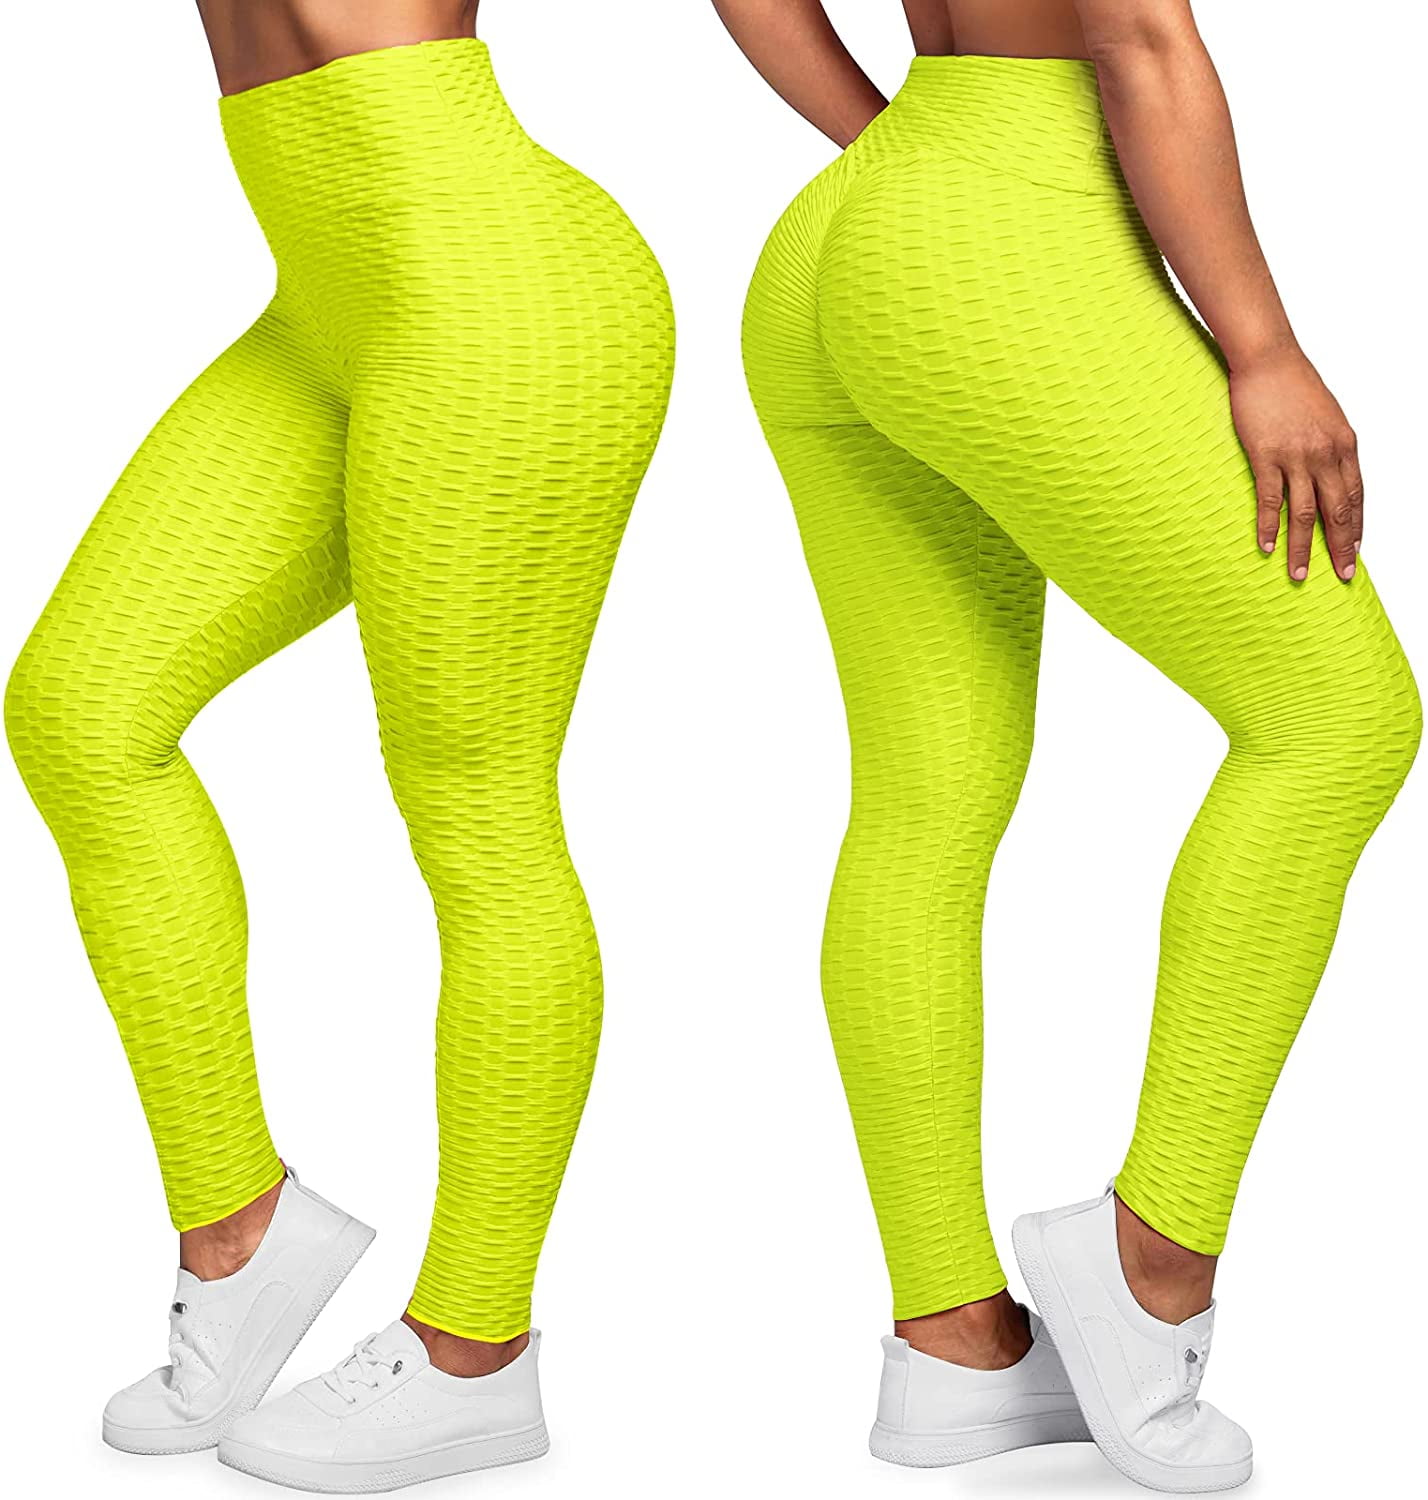 Home Sexy Peach Lift Leggings Women Push Up High Waist Butt Crack Leggins  Anti Cellulite Ruched Honeycomb Yoga Pants Tights Running From Smyy6, $5.44